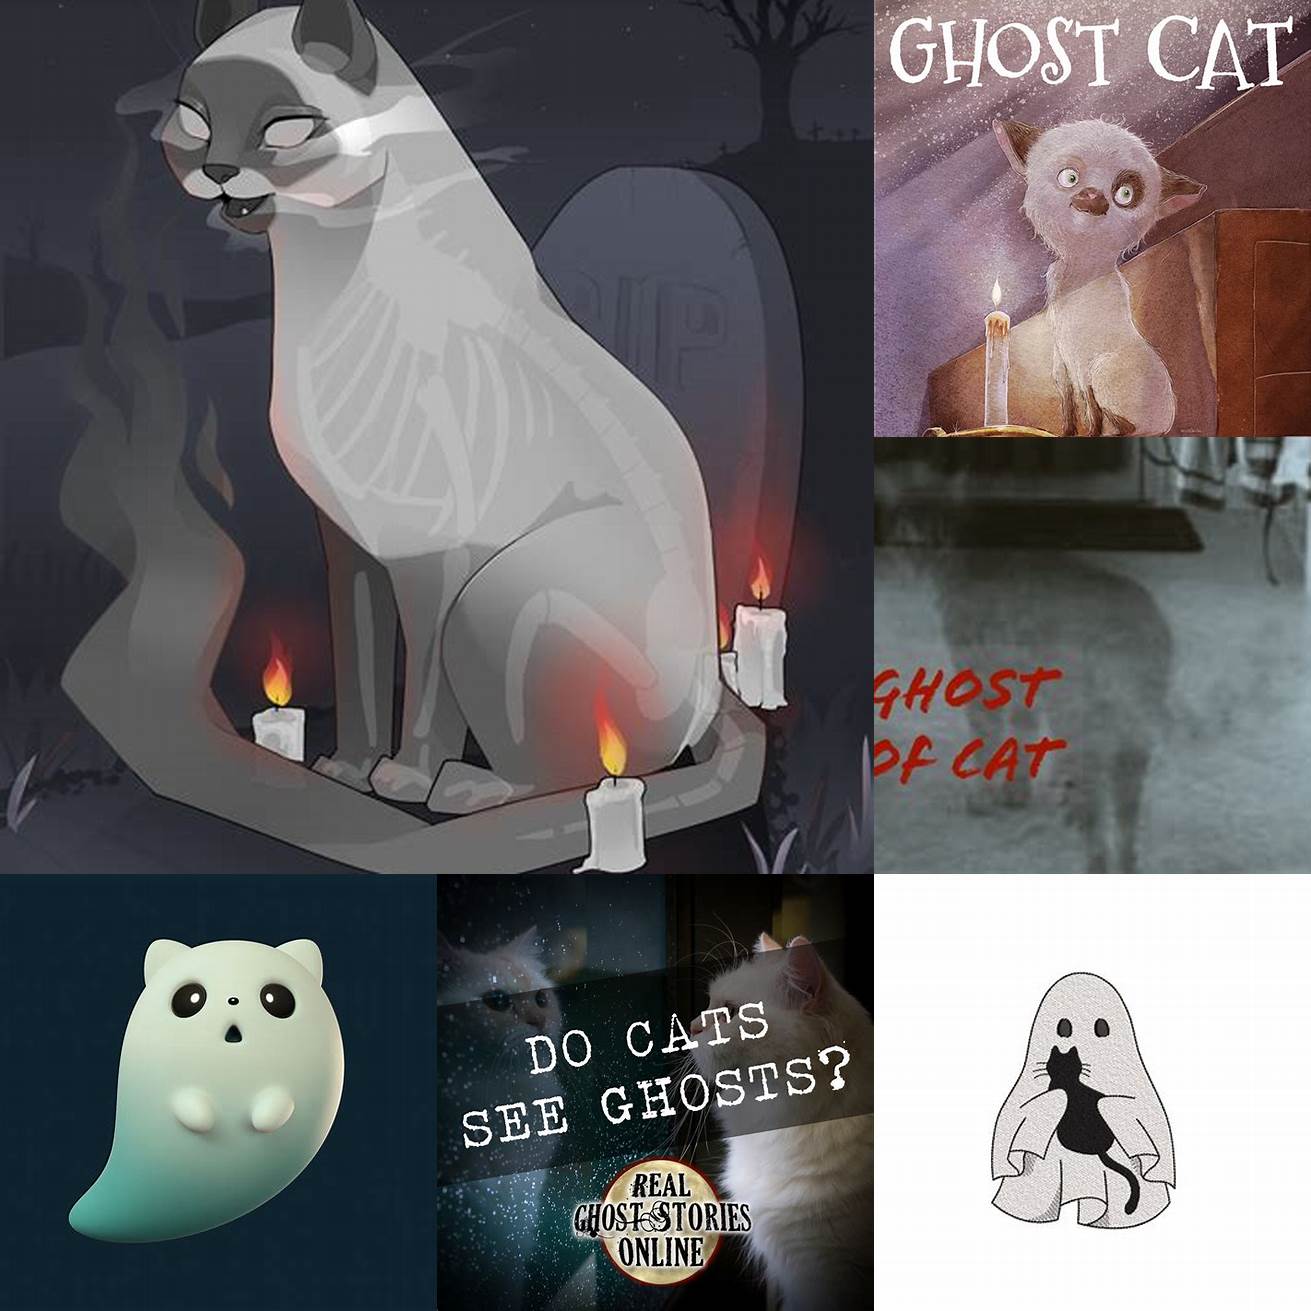 Collecting the Ghost Cat